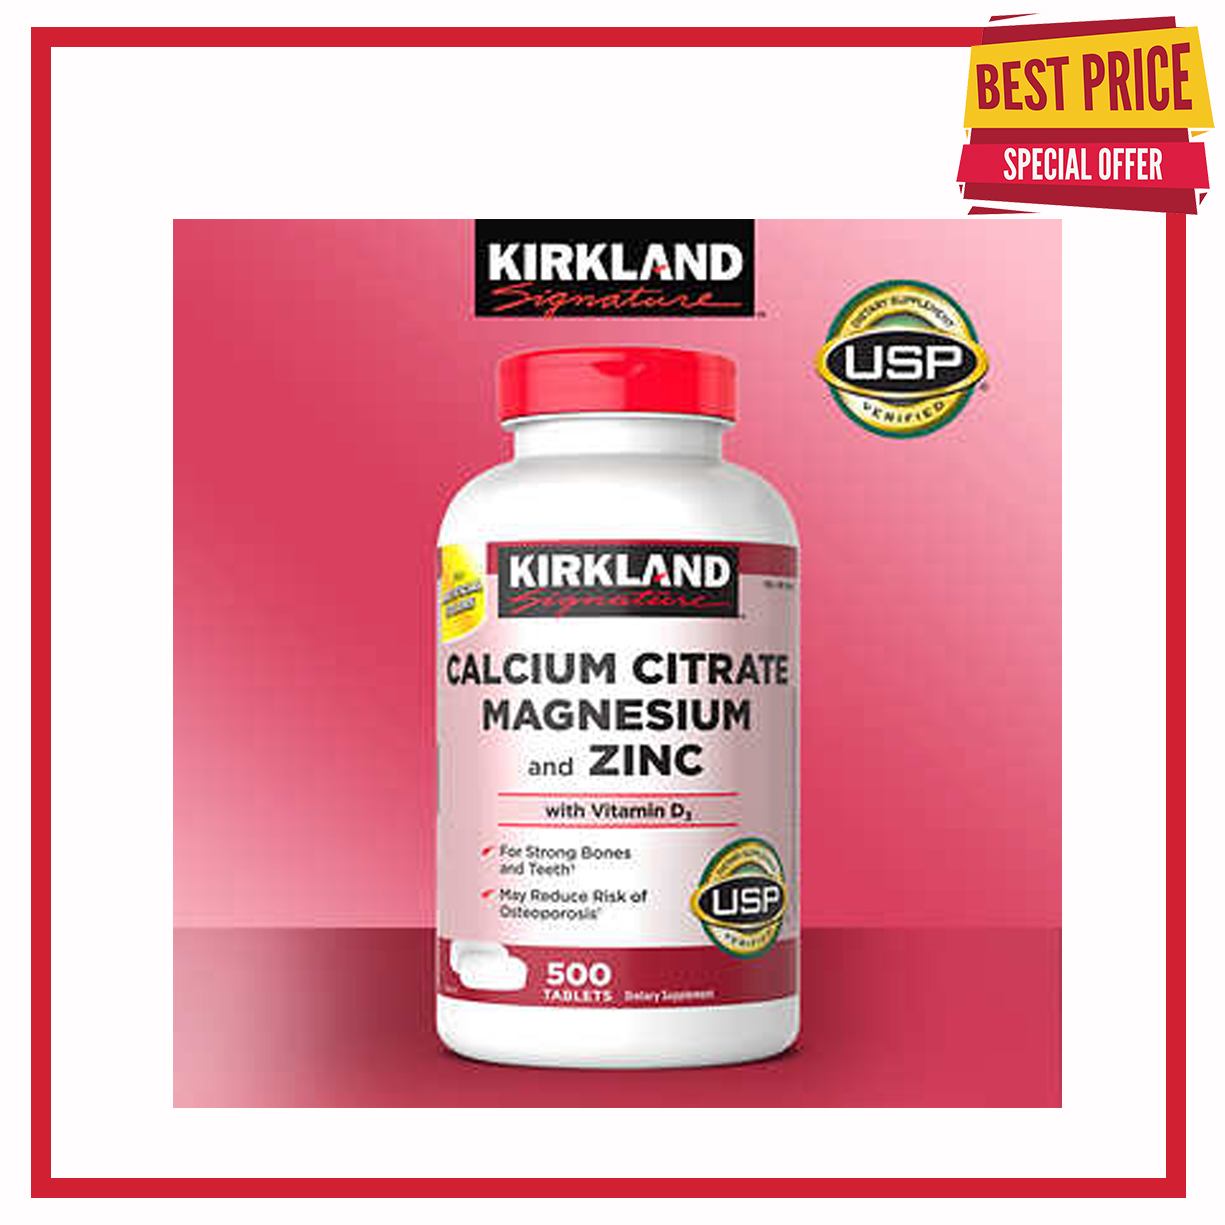 Kirkland Signature Calcium Citrate Magnesium And Zinc With D3 500 Tablets Expiry May 2022